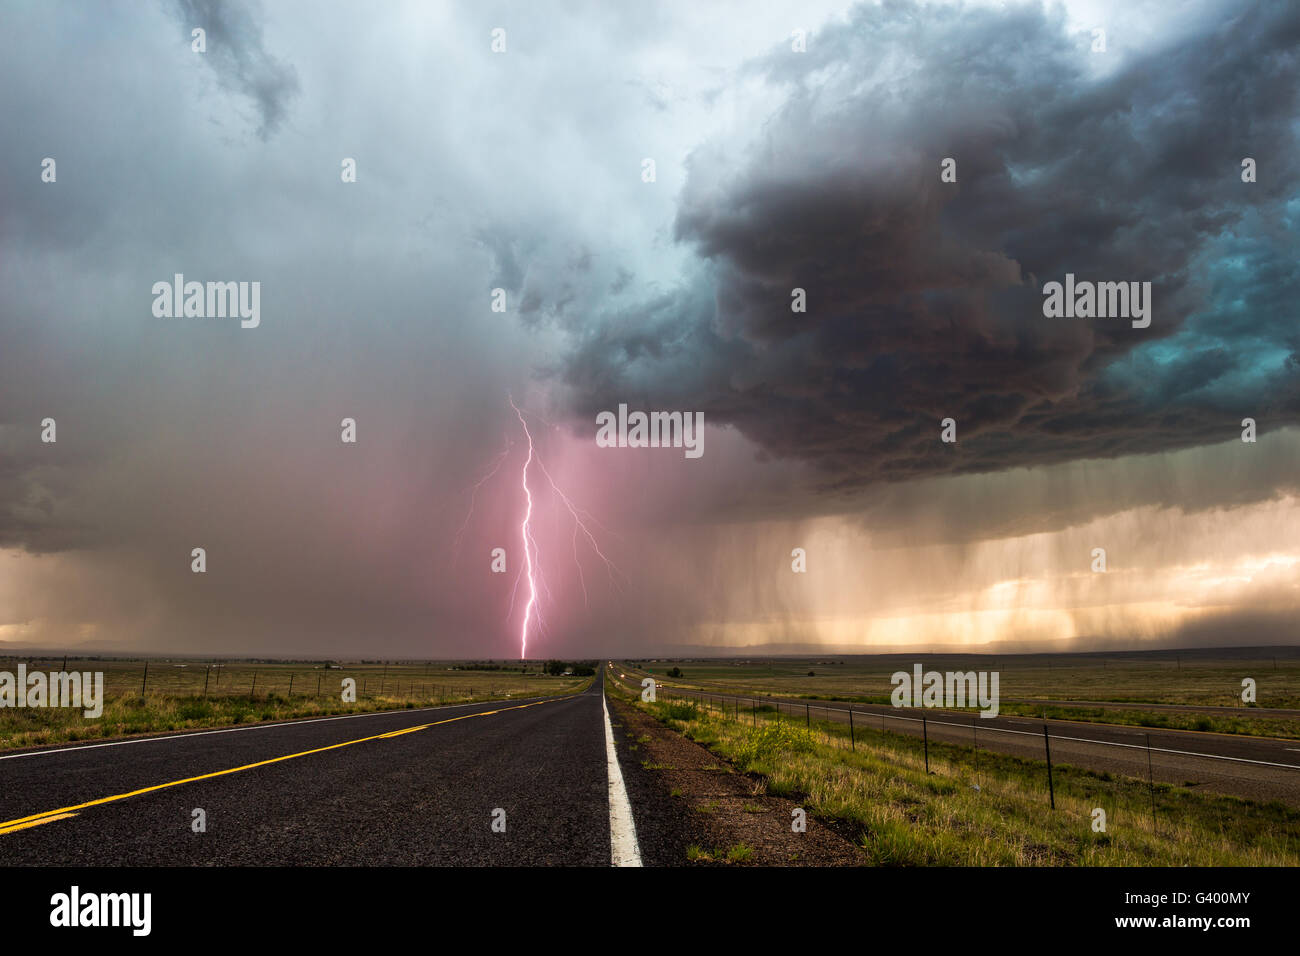 Lightning strike and dark storm clouds near Springer, New Mexico Stock Photo